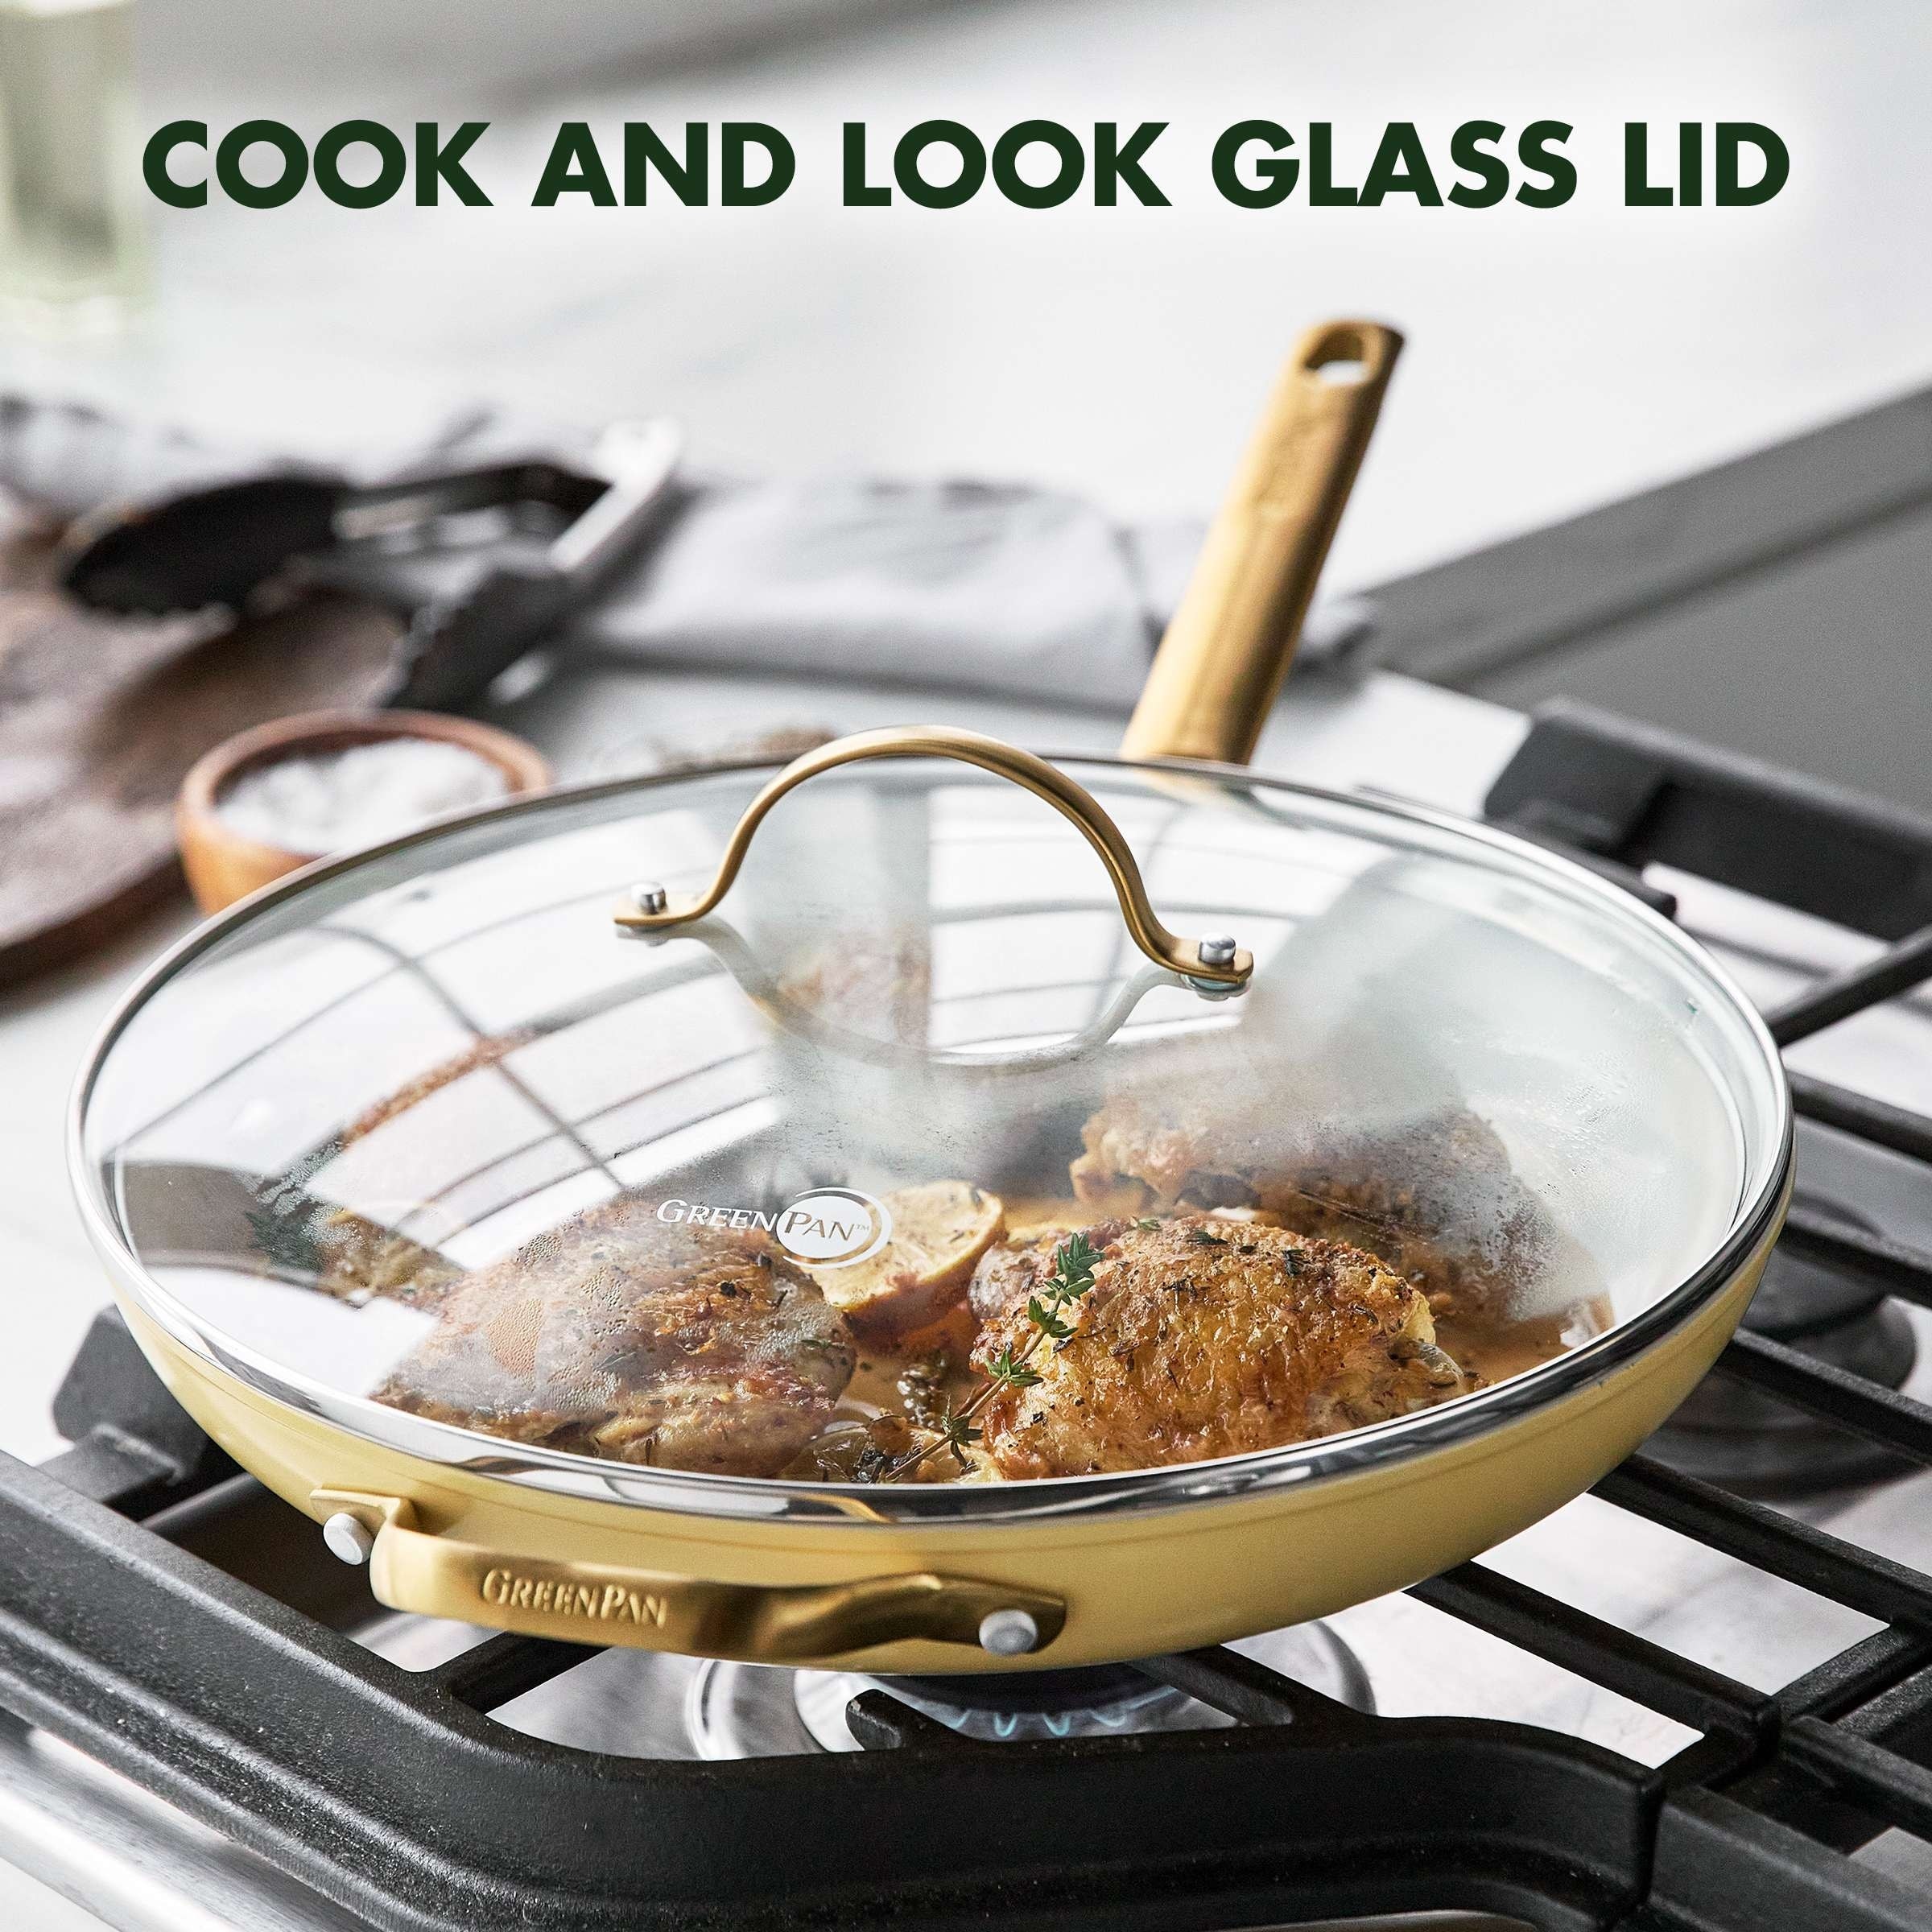 https://ak1.ostkcdn.com/images/products/is/images/direct/835e7b52e0a48cf36beb42d9ce63bb71a4171083/GreenPan-Reserve-Healthy-Ceramic-Nonstick-12%22-Fry-Pan-with-Lid.jpg